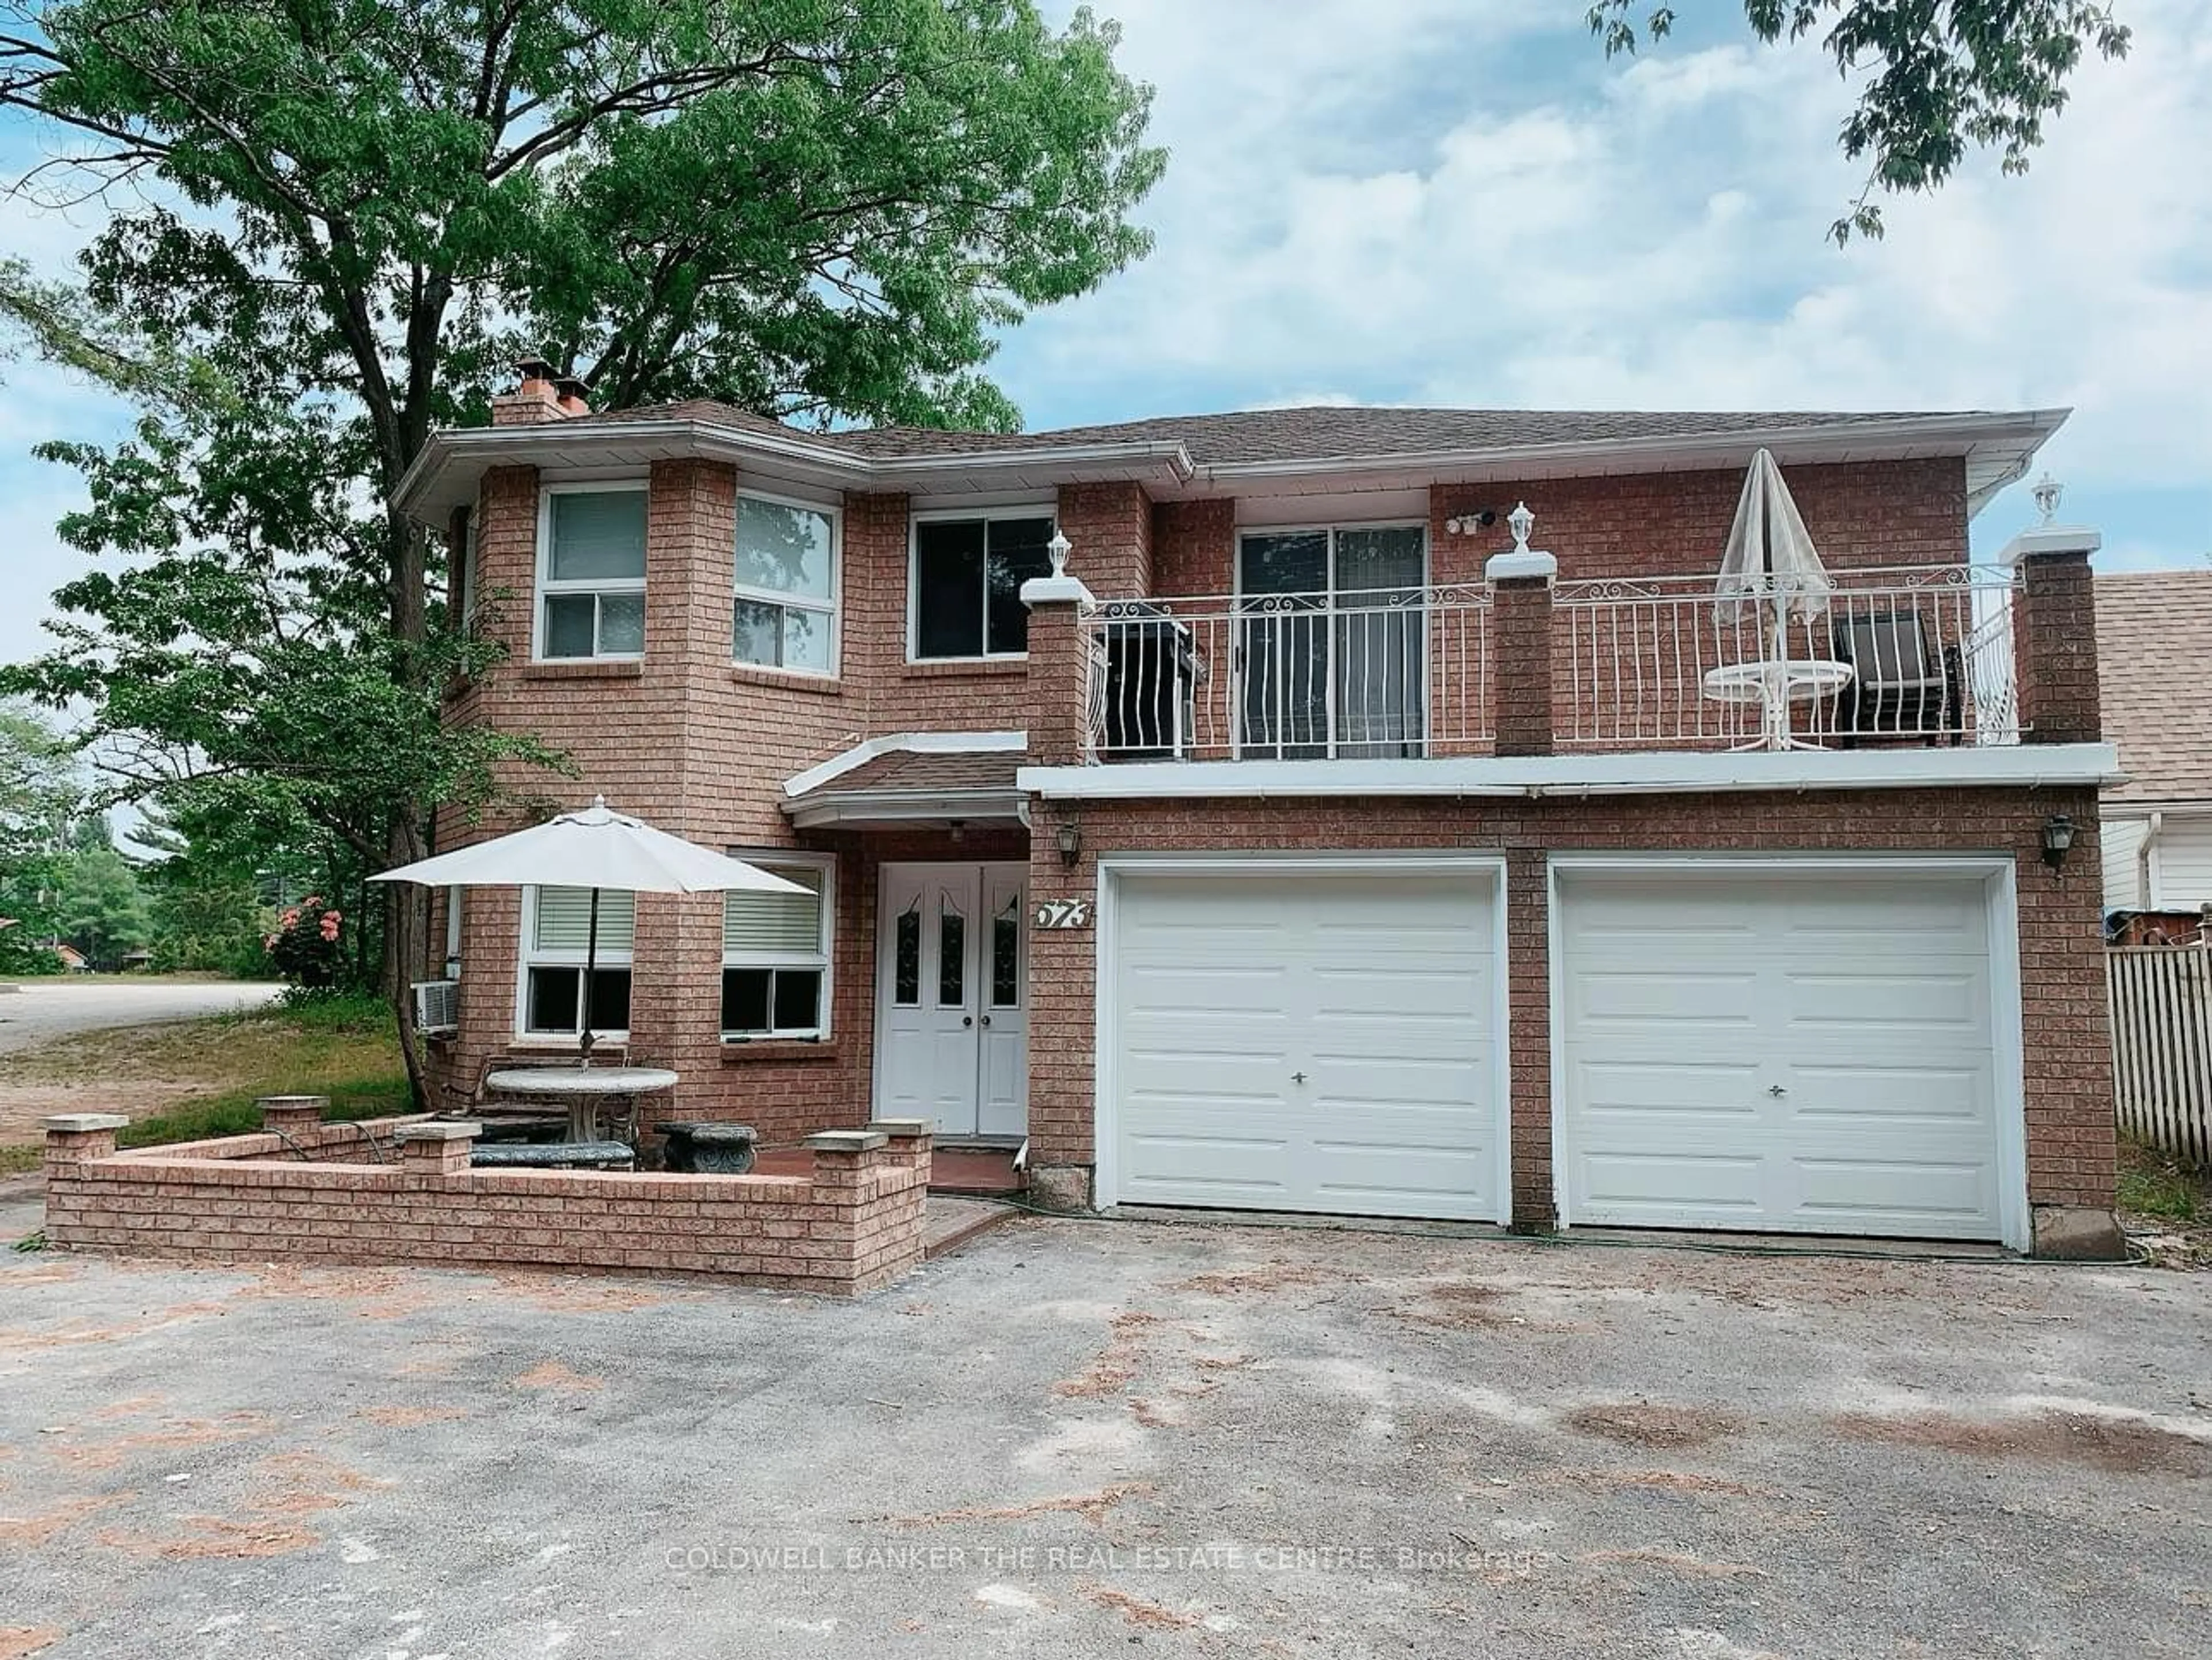 Home with brick exterior material for 573 Mosley St, Wasaga Beach Ontario L9Z 2J4